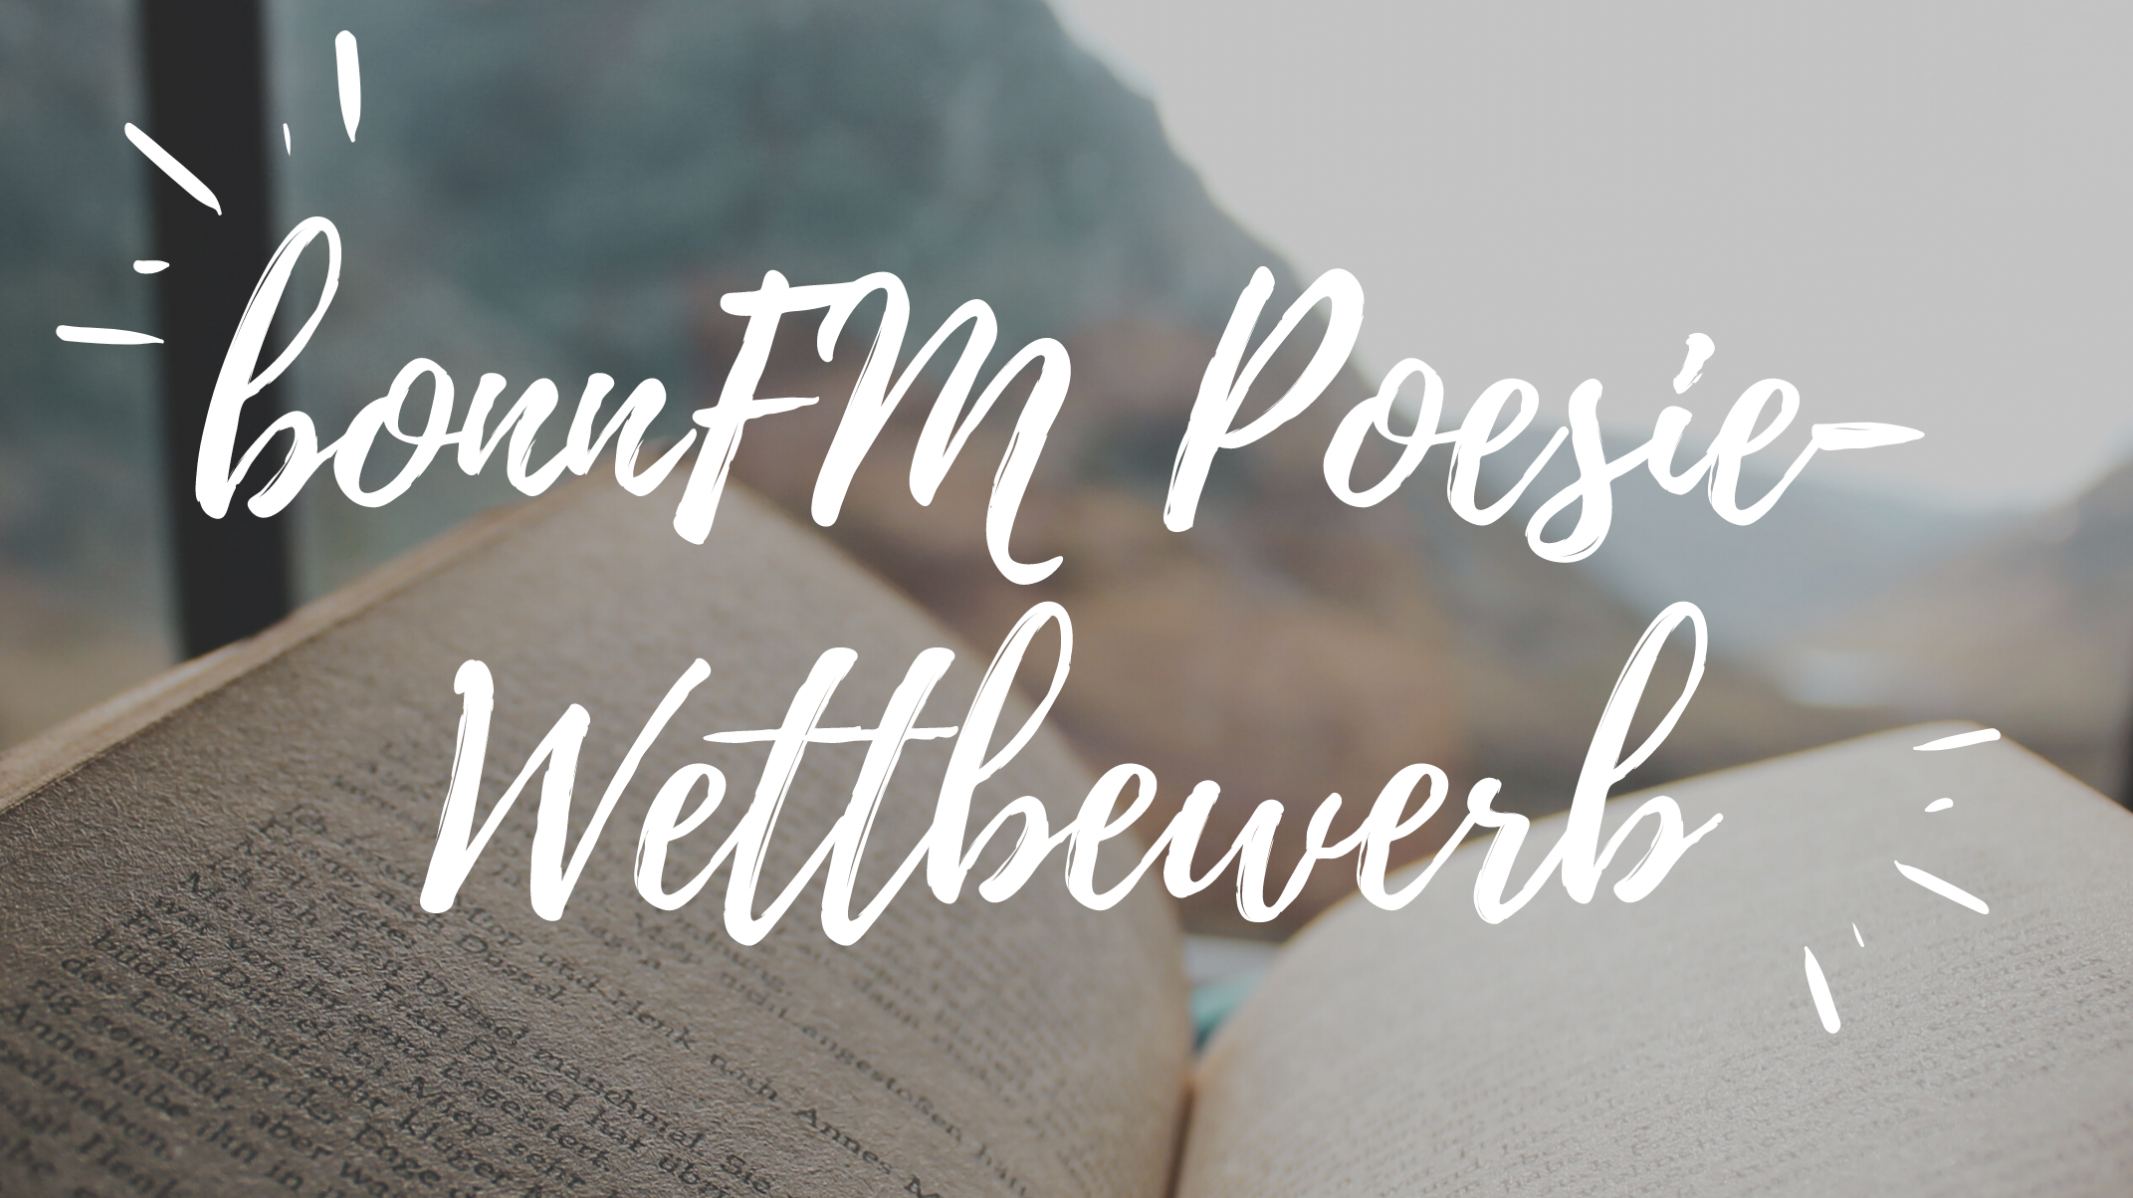 You are currently viewing Poesie-Wettbewerb